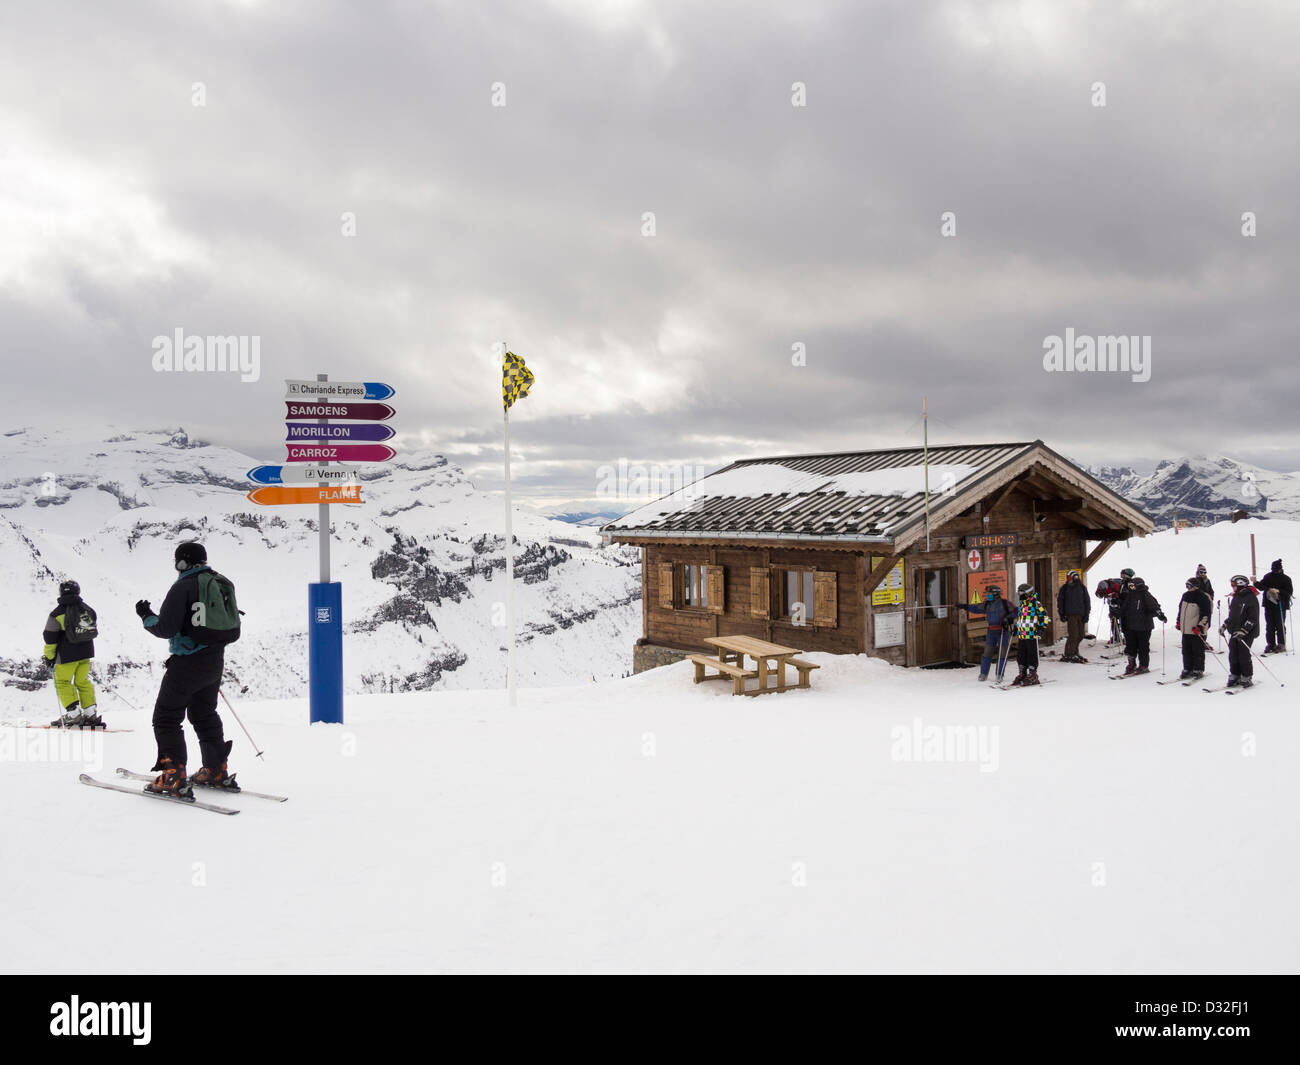 Skiers and first aid post on Tete Des Saix in Grand Massif ski area in French Alps above Samoëns, Rhone-Alpes, France Stock Photo